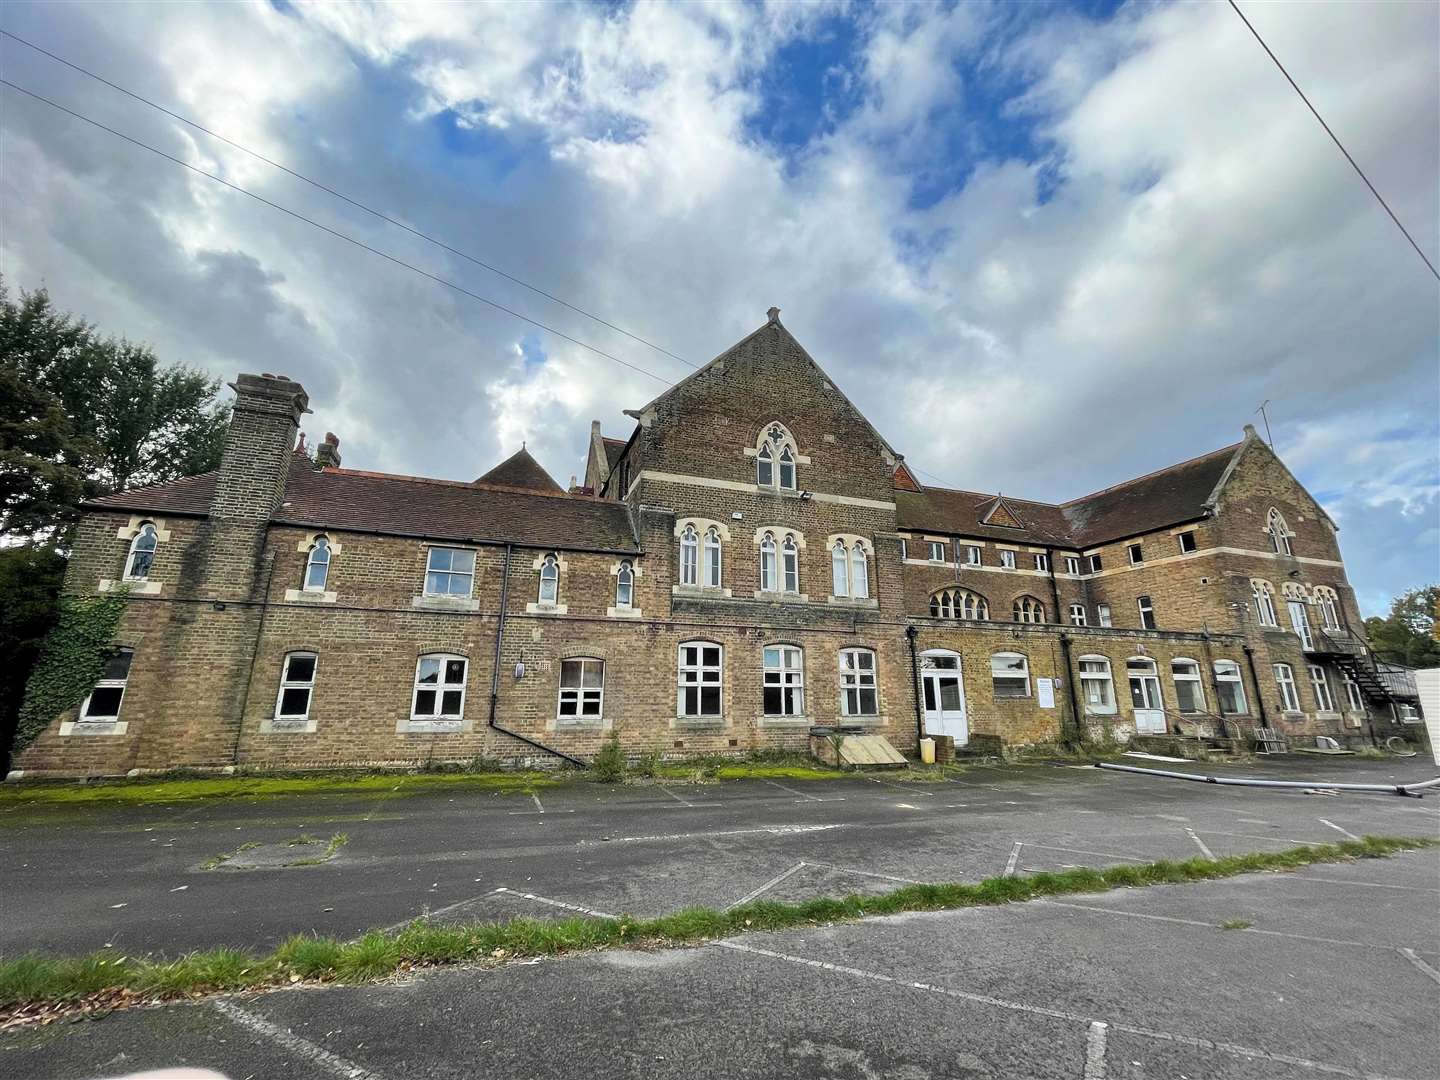 The orginal building of Borden Grammar School, in College Road, Sittingbourne, was sold for £1.65m. Picture: Deep South Media (53882054)